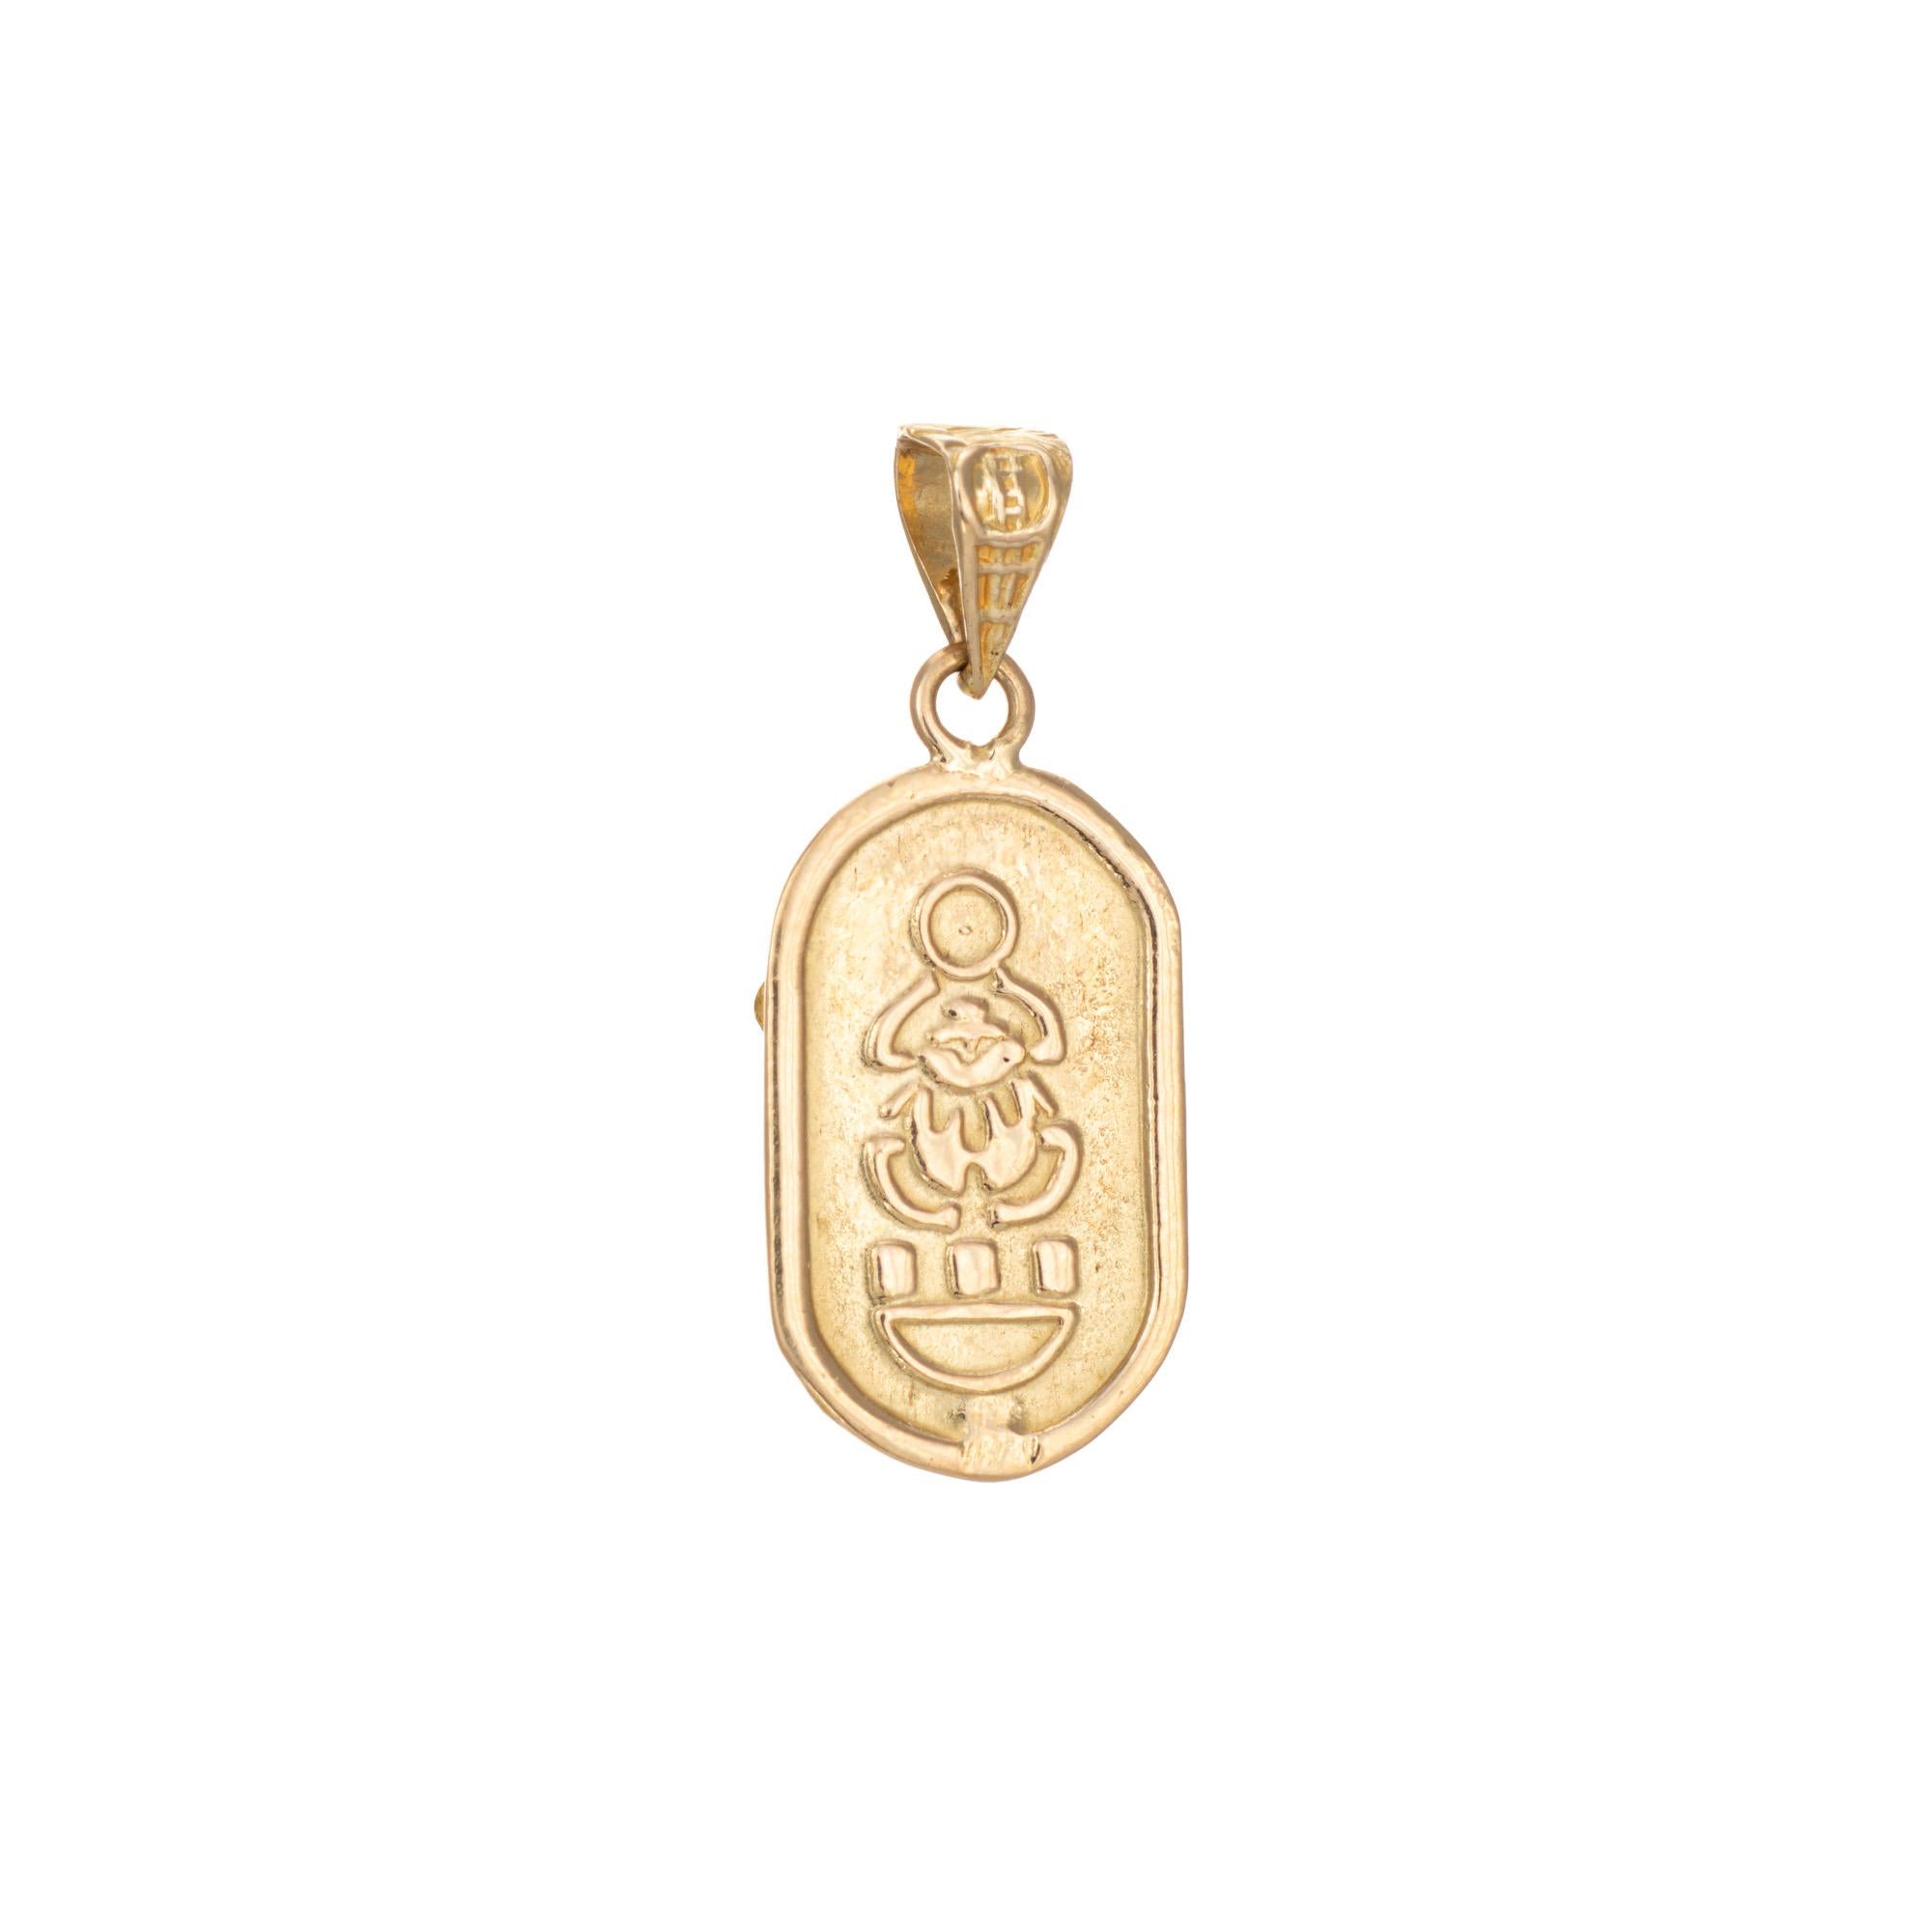 Finely detailed vintage Scarab beetle charm crafted in 18k yellow gold.  

Lapis lazuli is set into the mount, measuring 6mm x 4mm.

The nicely detailed scarab is rendered in lifelike detail with embossed hieroglyphs to the reverse side. The scarab